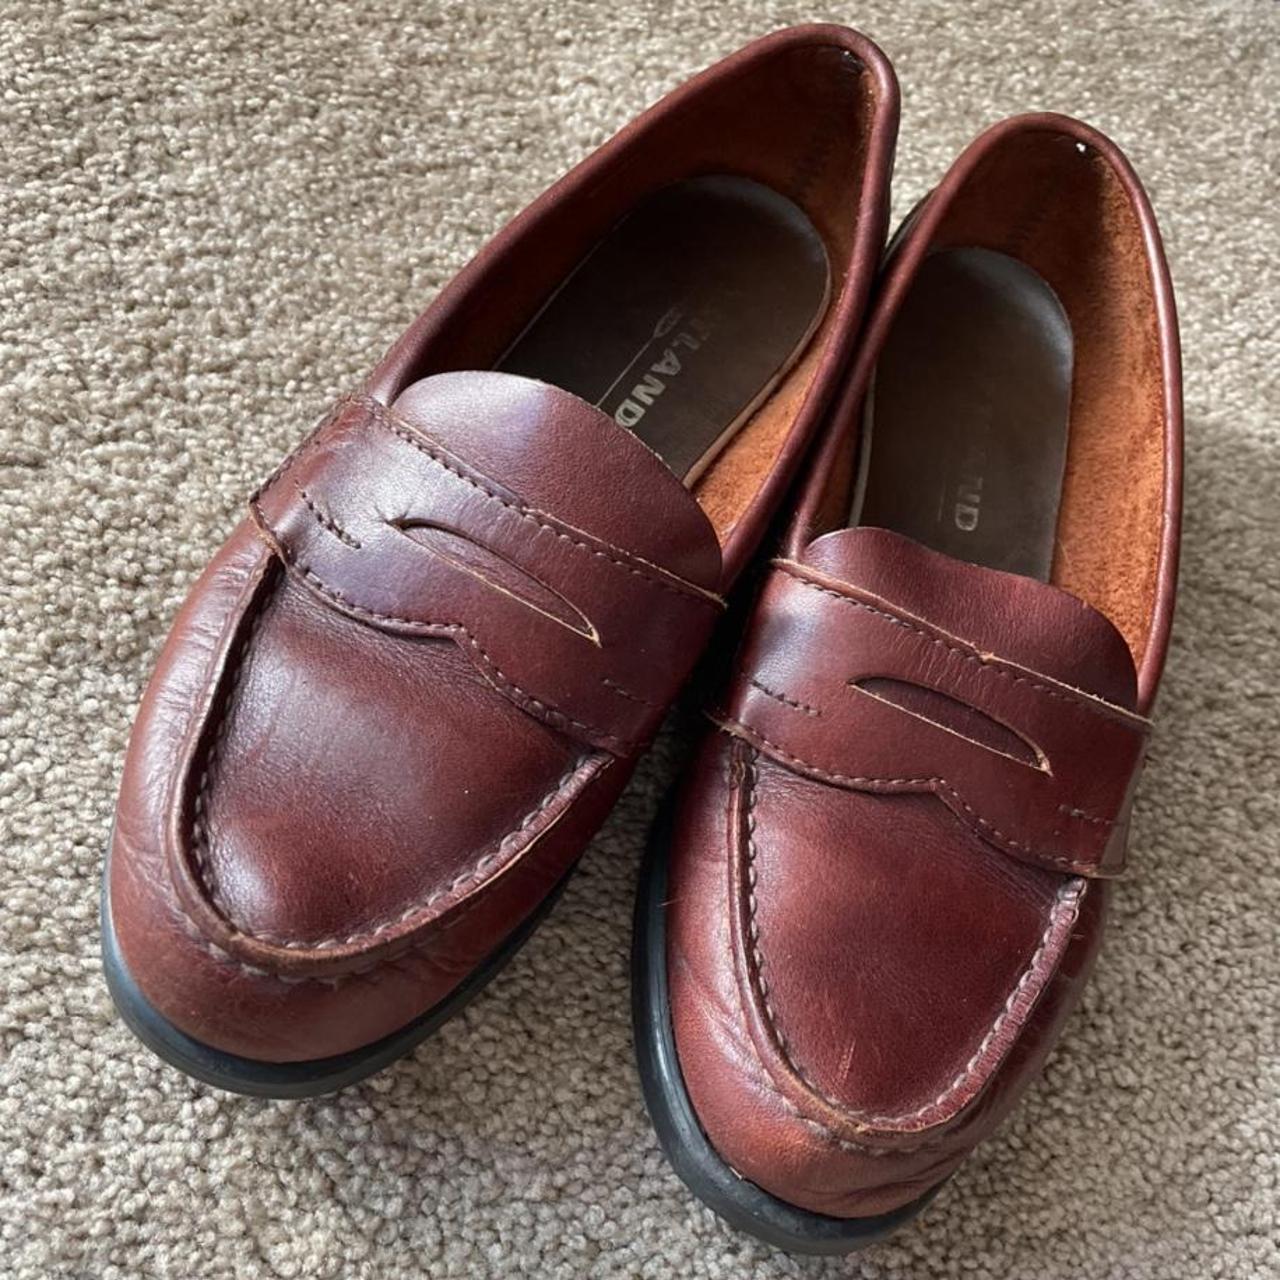 Eastland Women's Brown and Burgundy Loafers